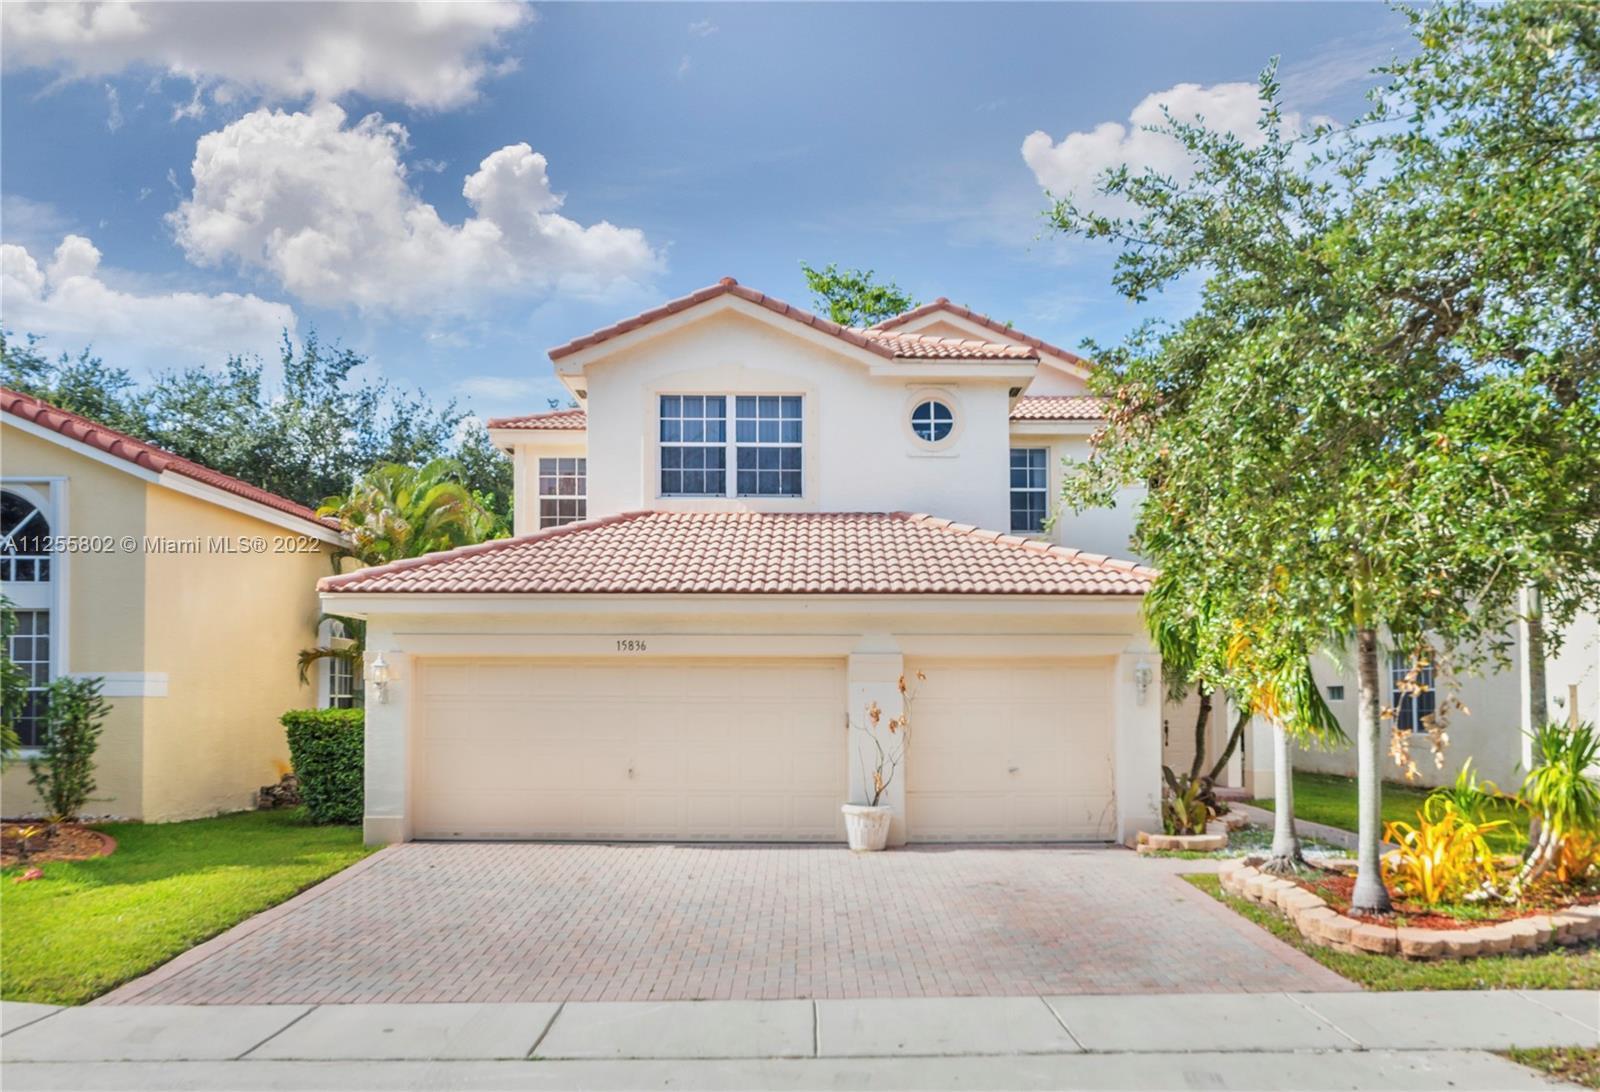 A 6 bedroom, 4 bathroom, 3,446 sq. ft. home in Silver Shores neighborhood with a 3-car garage. There